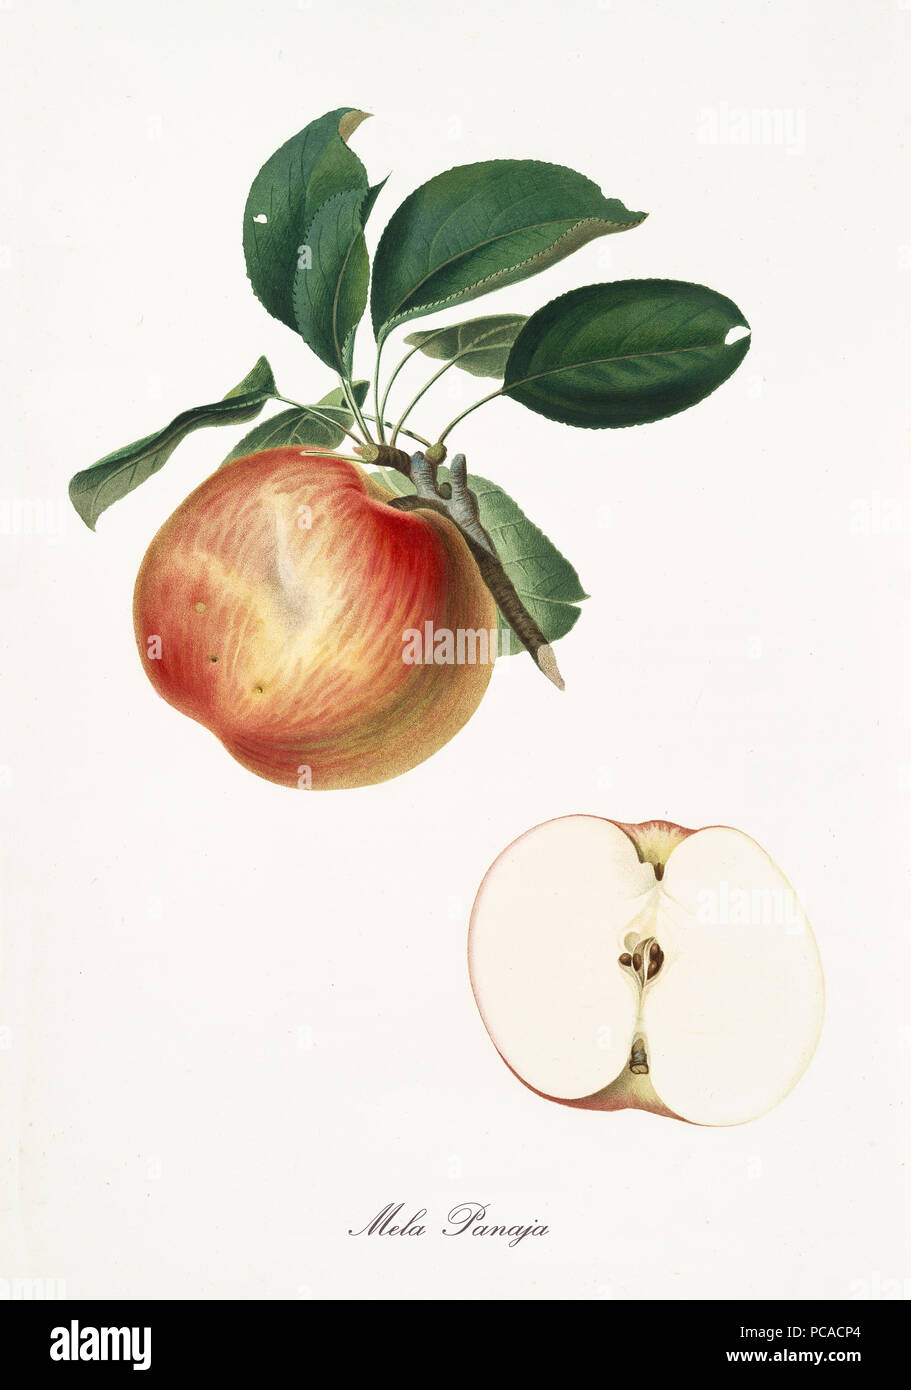 Apple, panaja apple, on a single branch with apple leaves on white background and fruit section. Old botanical illustration realized with a detailed watercolor by Giorgio Gallesio on 1817,1839 Italy Stock Photo